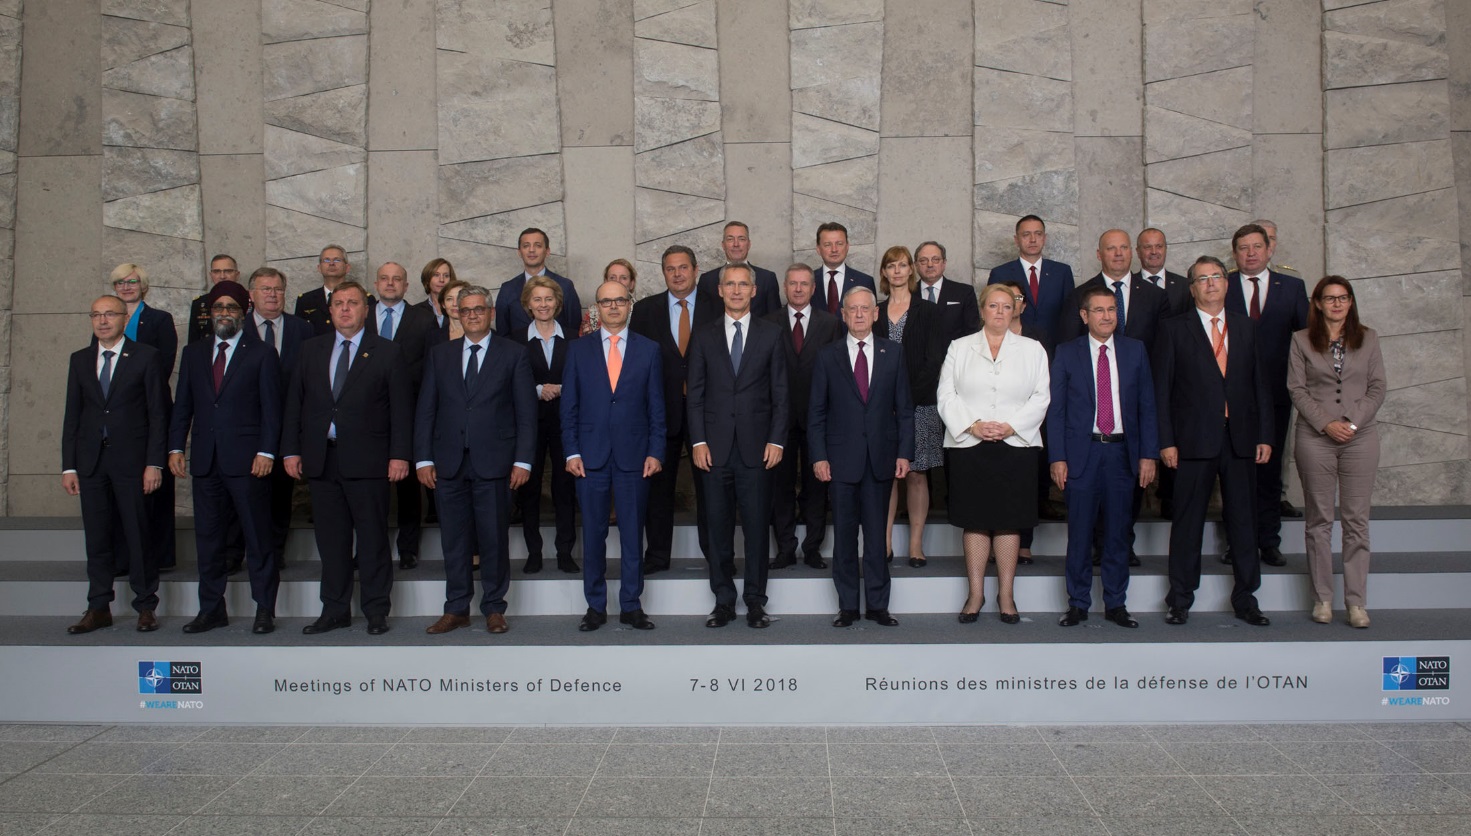 Official Portrait of the NATO Ministers of Defence